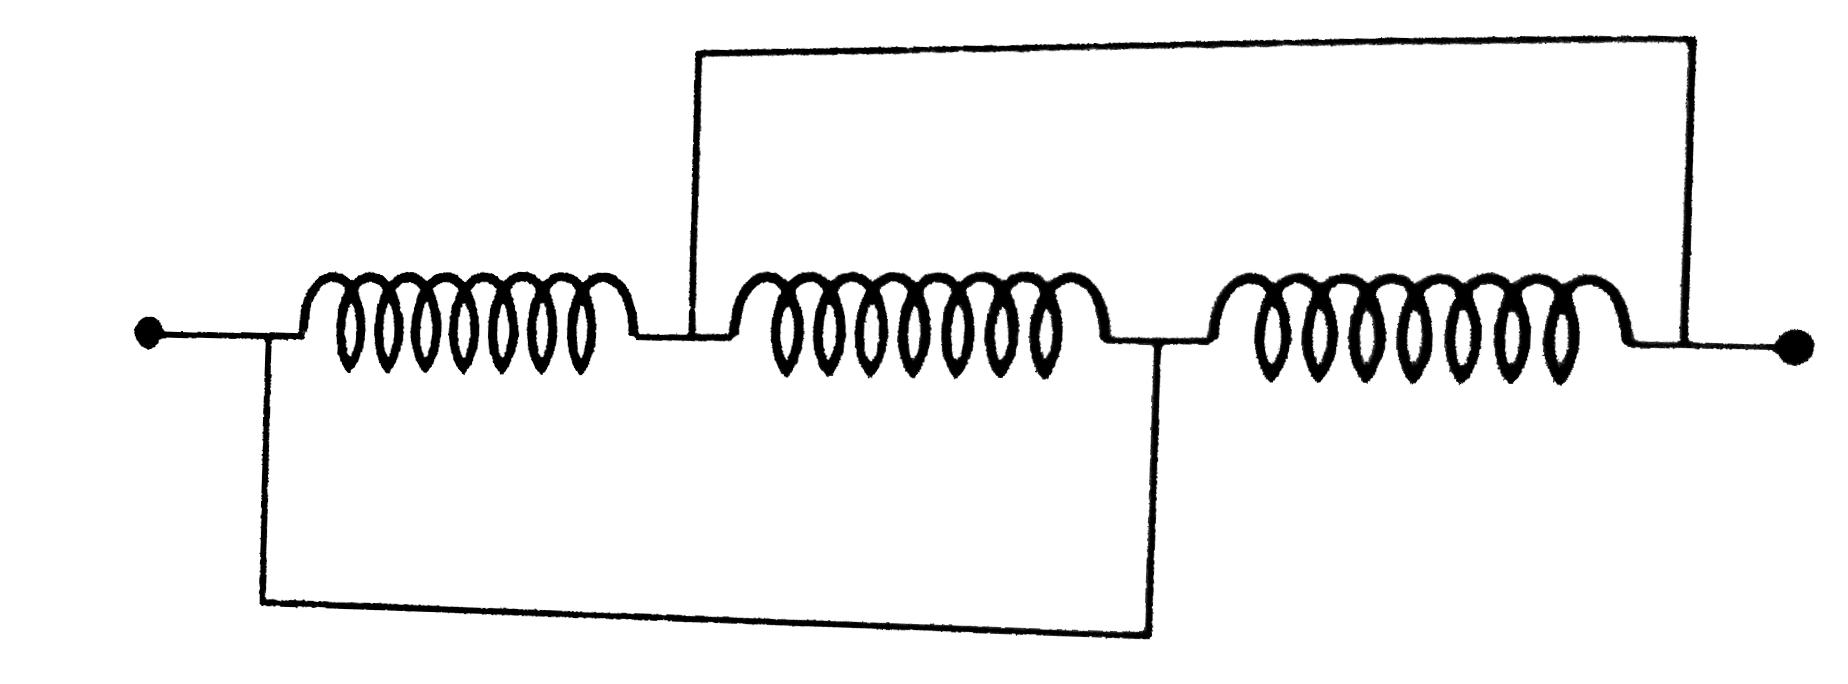 Pure inductance of 3.0 H is connected as shown below. The equivalent inductance of the circuit is